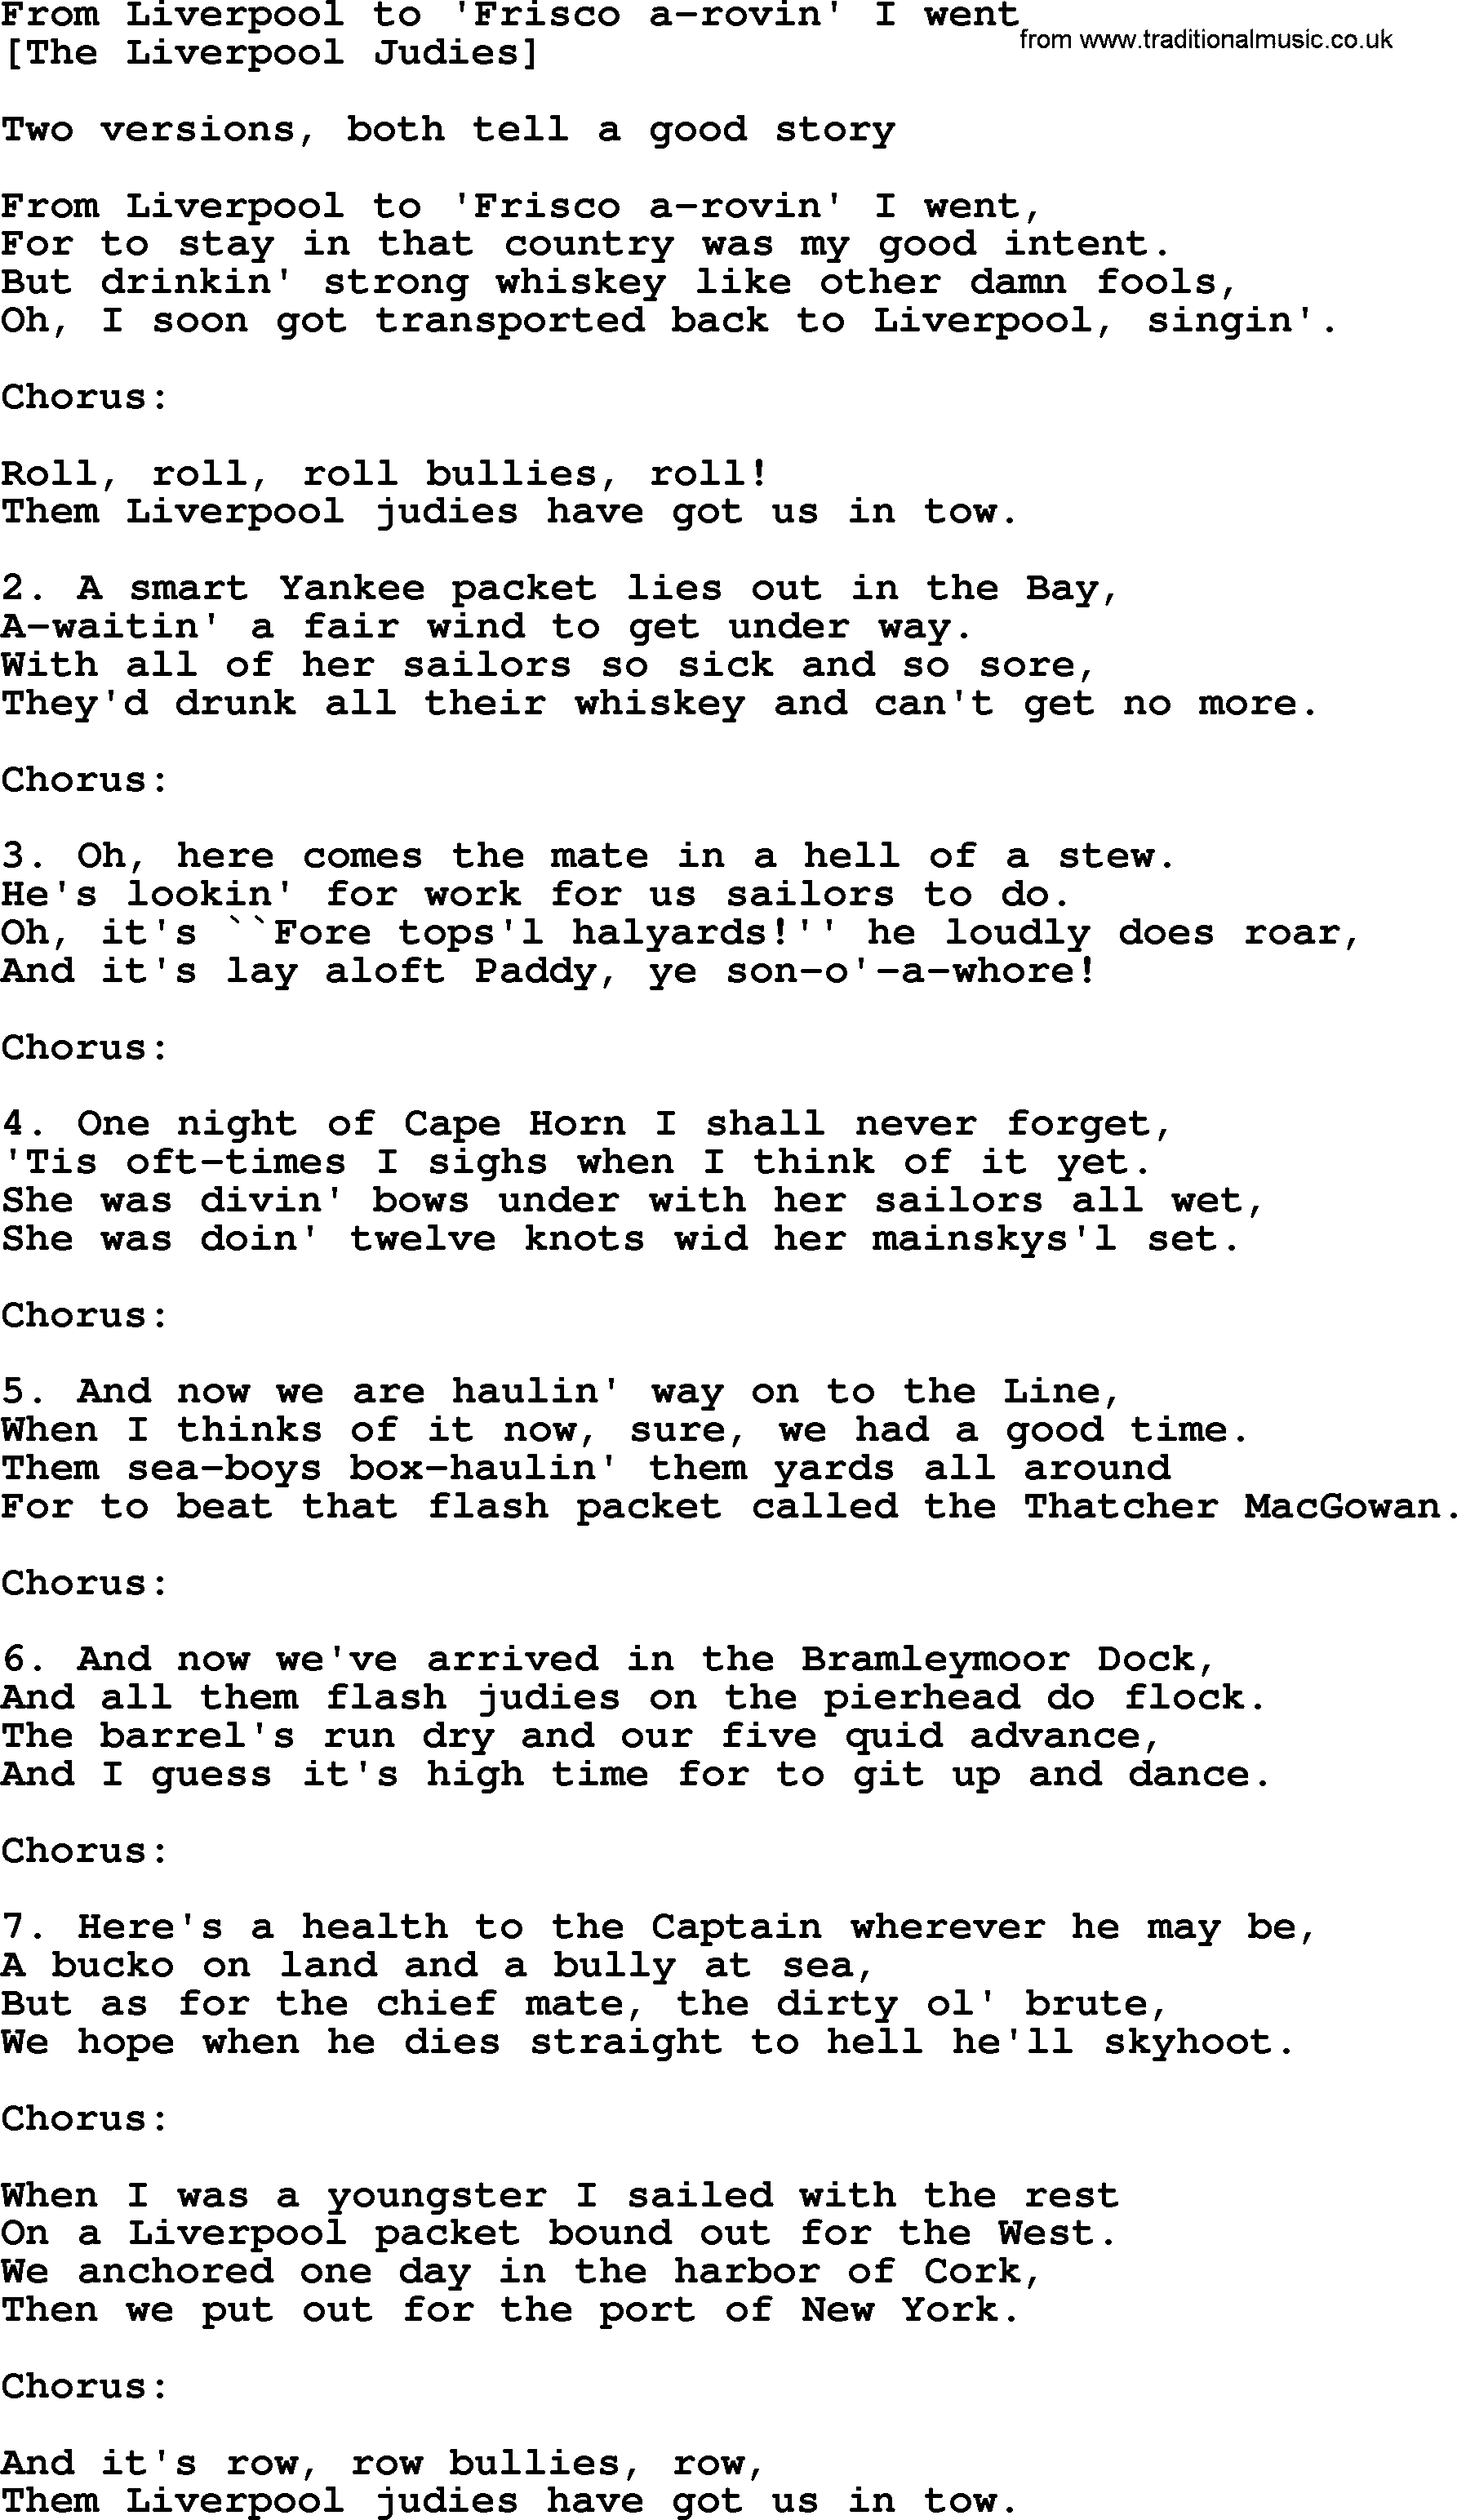 Old English Song Lyrics For From Liverpool To Frisco A Rovin I Went With Pdf Ain't it high time we went there? traditional music library